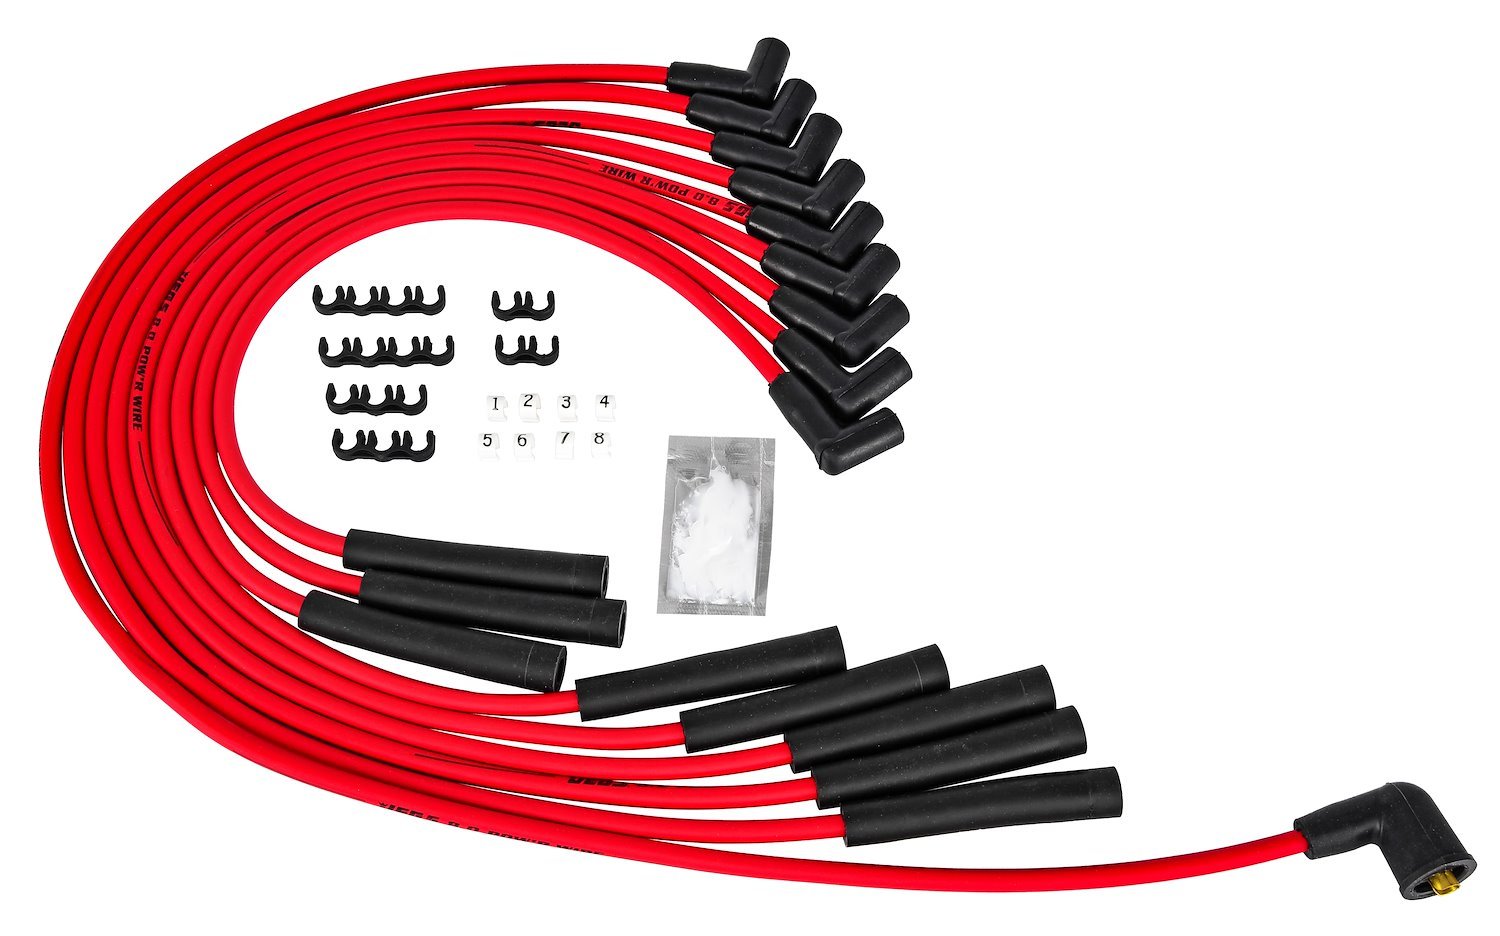 A-Team Performance Red Silicone Spark Plug Wires Set 90 Degree Black Boot  for HEI Distributor Ignition Coil Accessories Compatible With Mopar  Chrysler